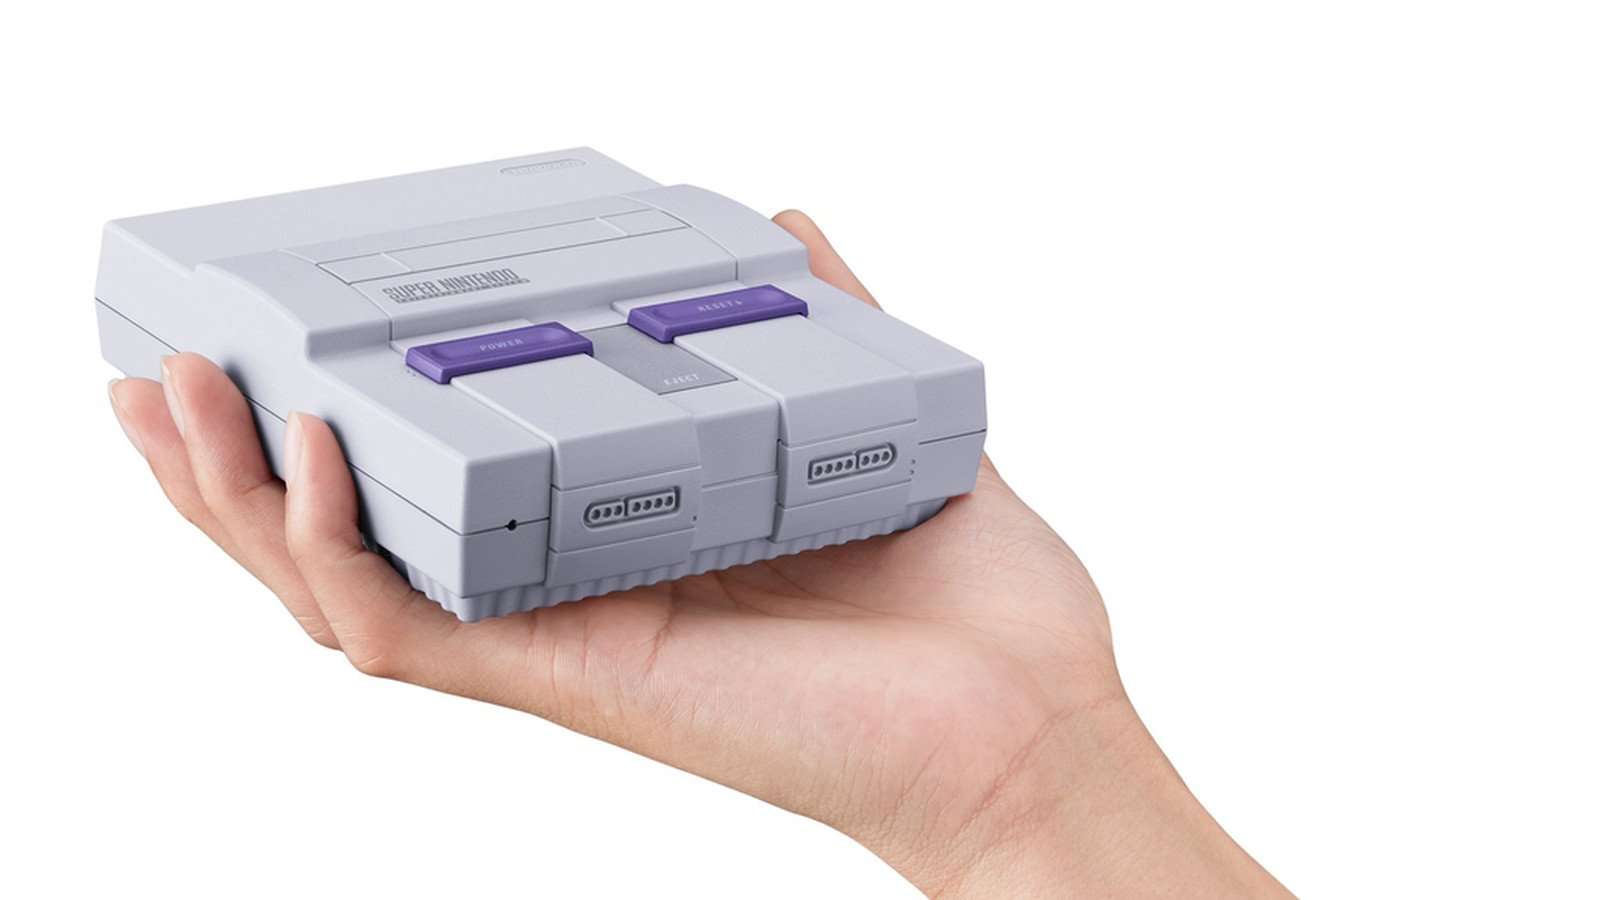 image for The mini SNES Classic launches in September for $80